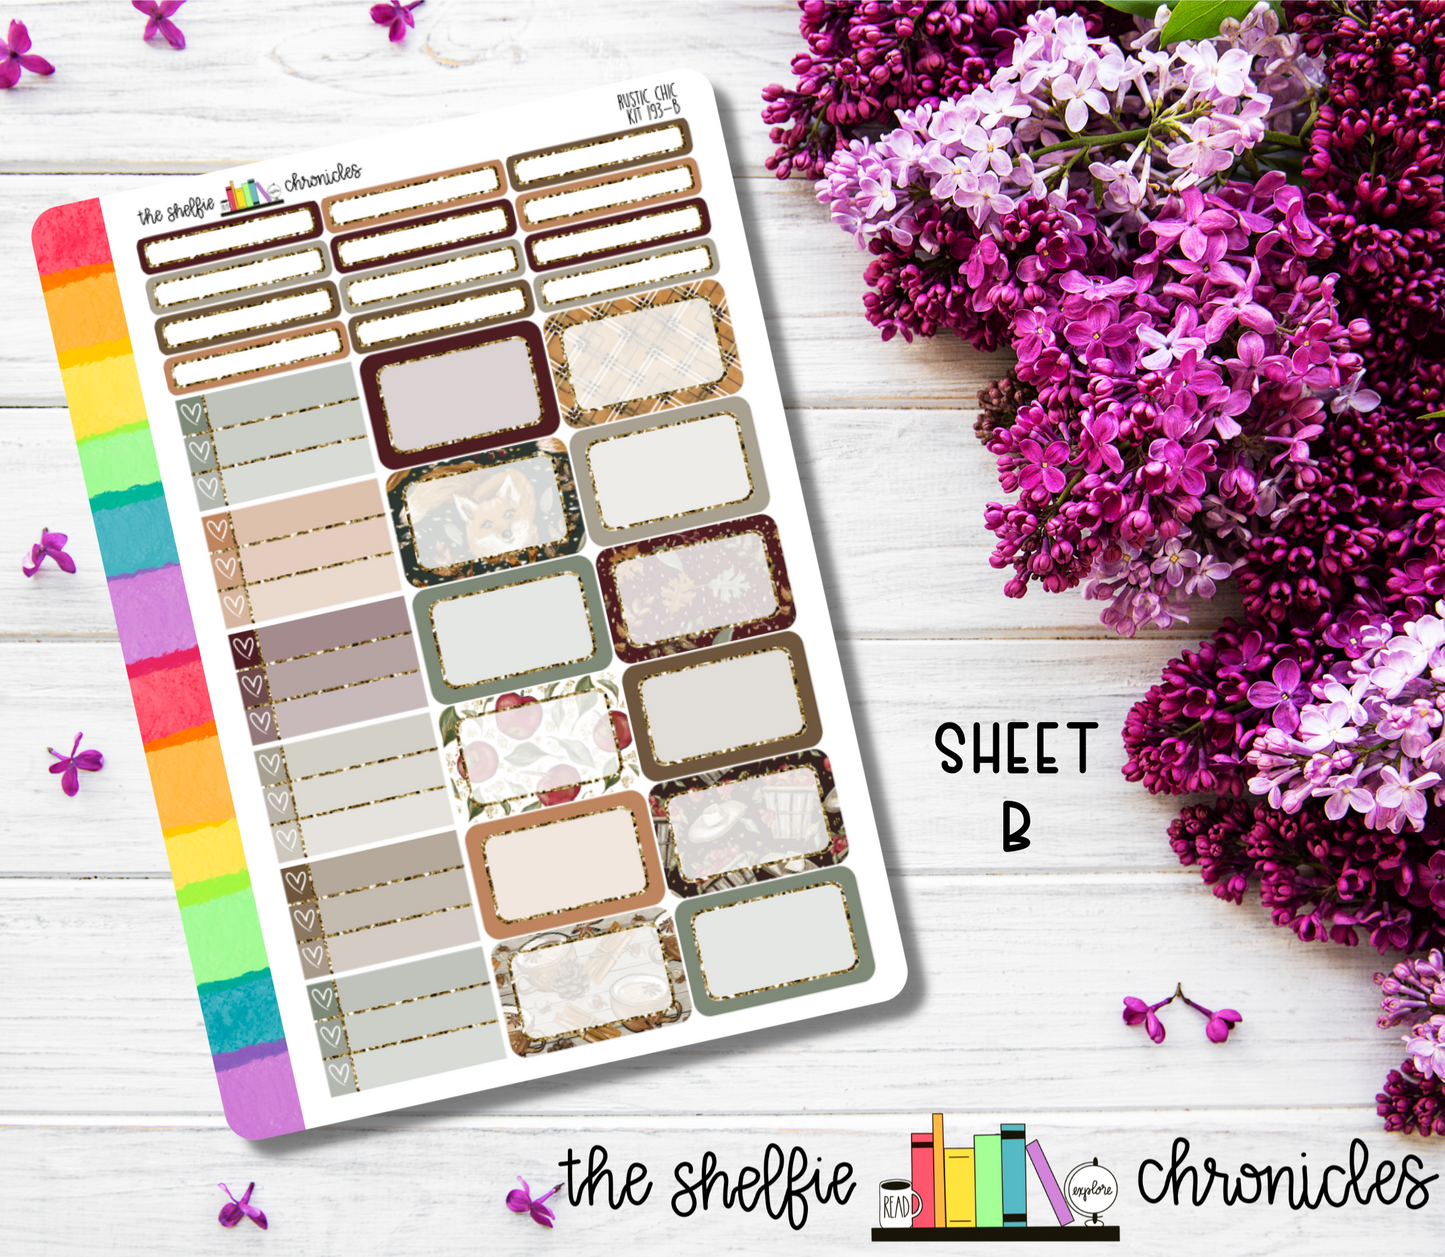 Kit 193 - Rustic Chic Weekly Kit - Die Cut Stickers - Repositionable Paper - Made To Fit 7x9 Planners